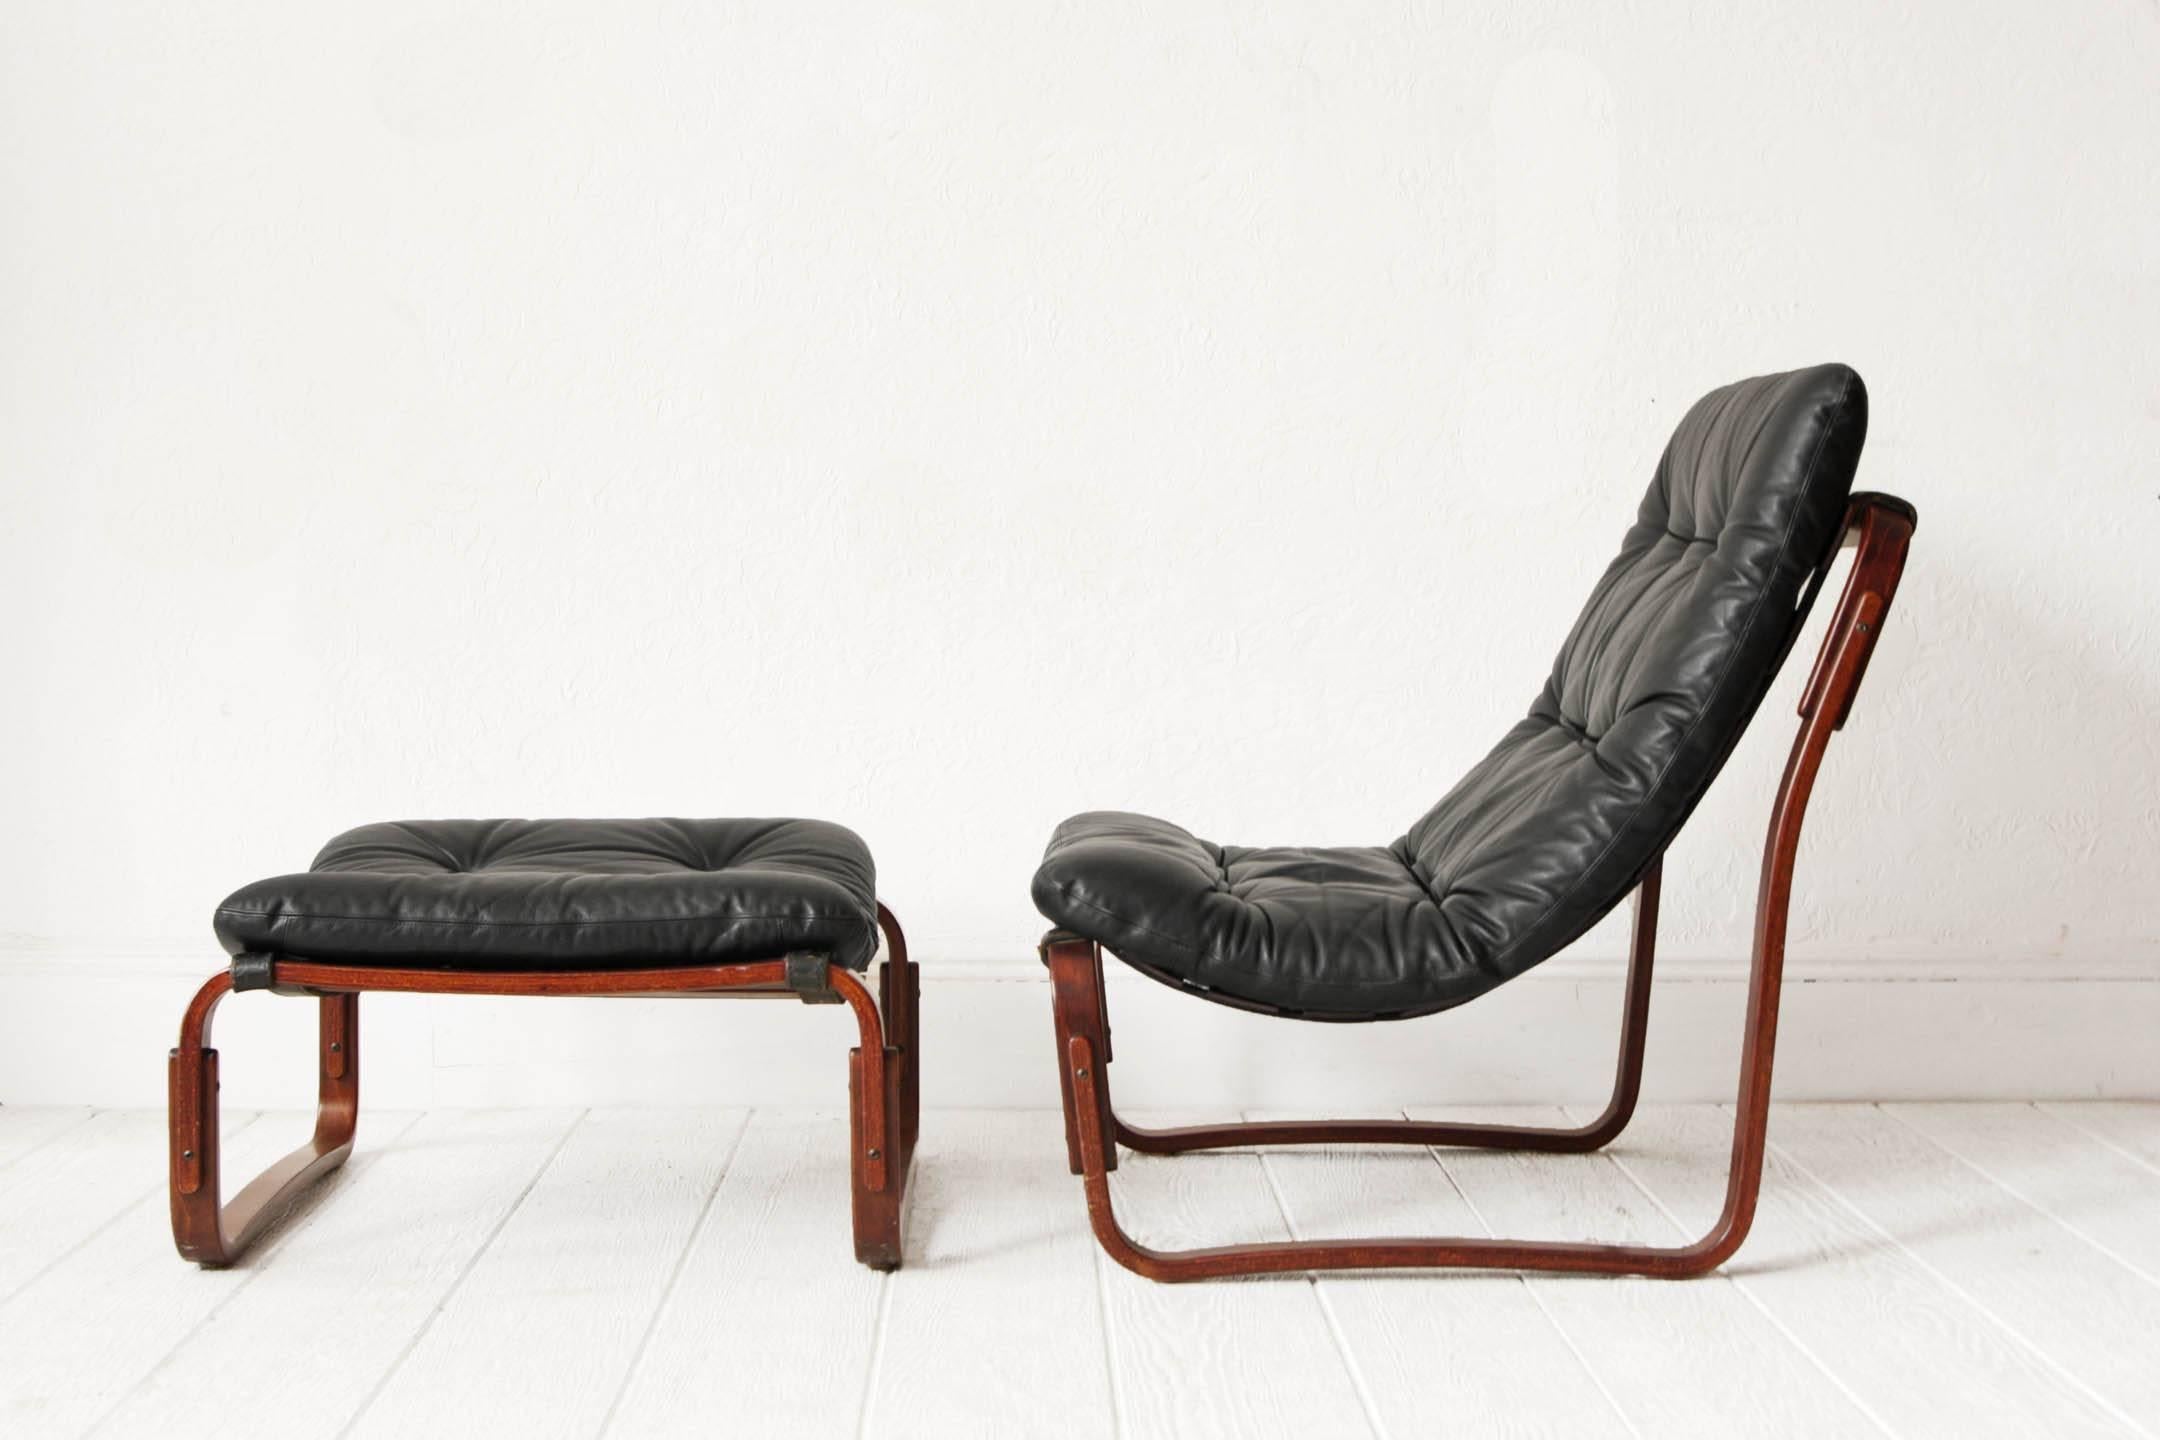 Lounge chair and ottoman by Ingmar Relling for Westnofa. Made in Norway / Scandinavian Modern. Black leather cushions on stained oak slat and leather 'sling' frame. The back of the cushions are an off-white canvas color. 
Measures:
Chair: 27.5